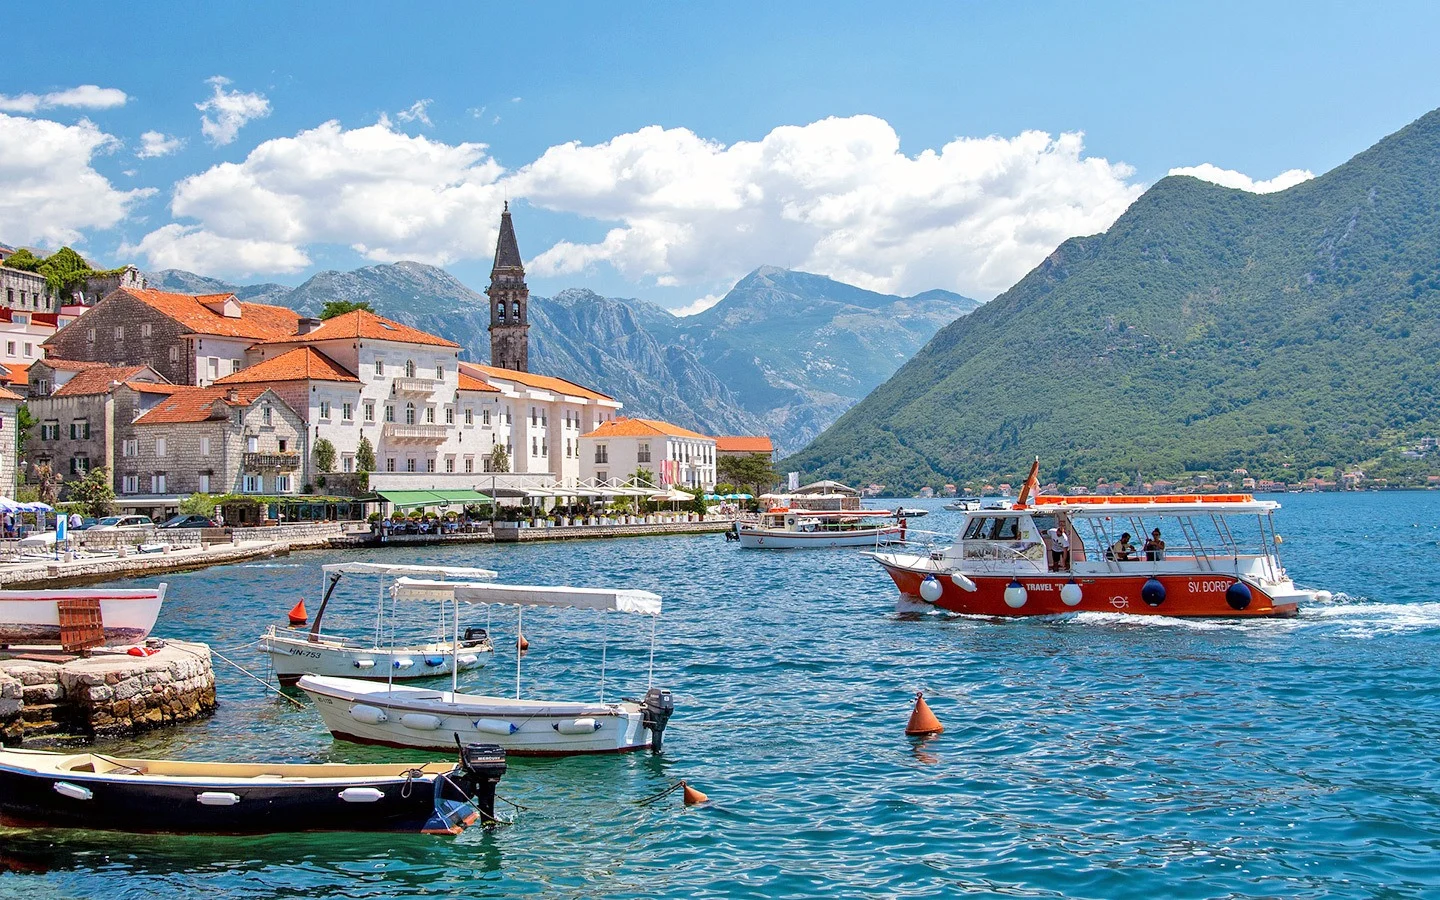 Boats in the harbour in Perast, Bay of Kotor